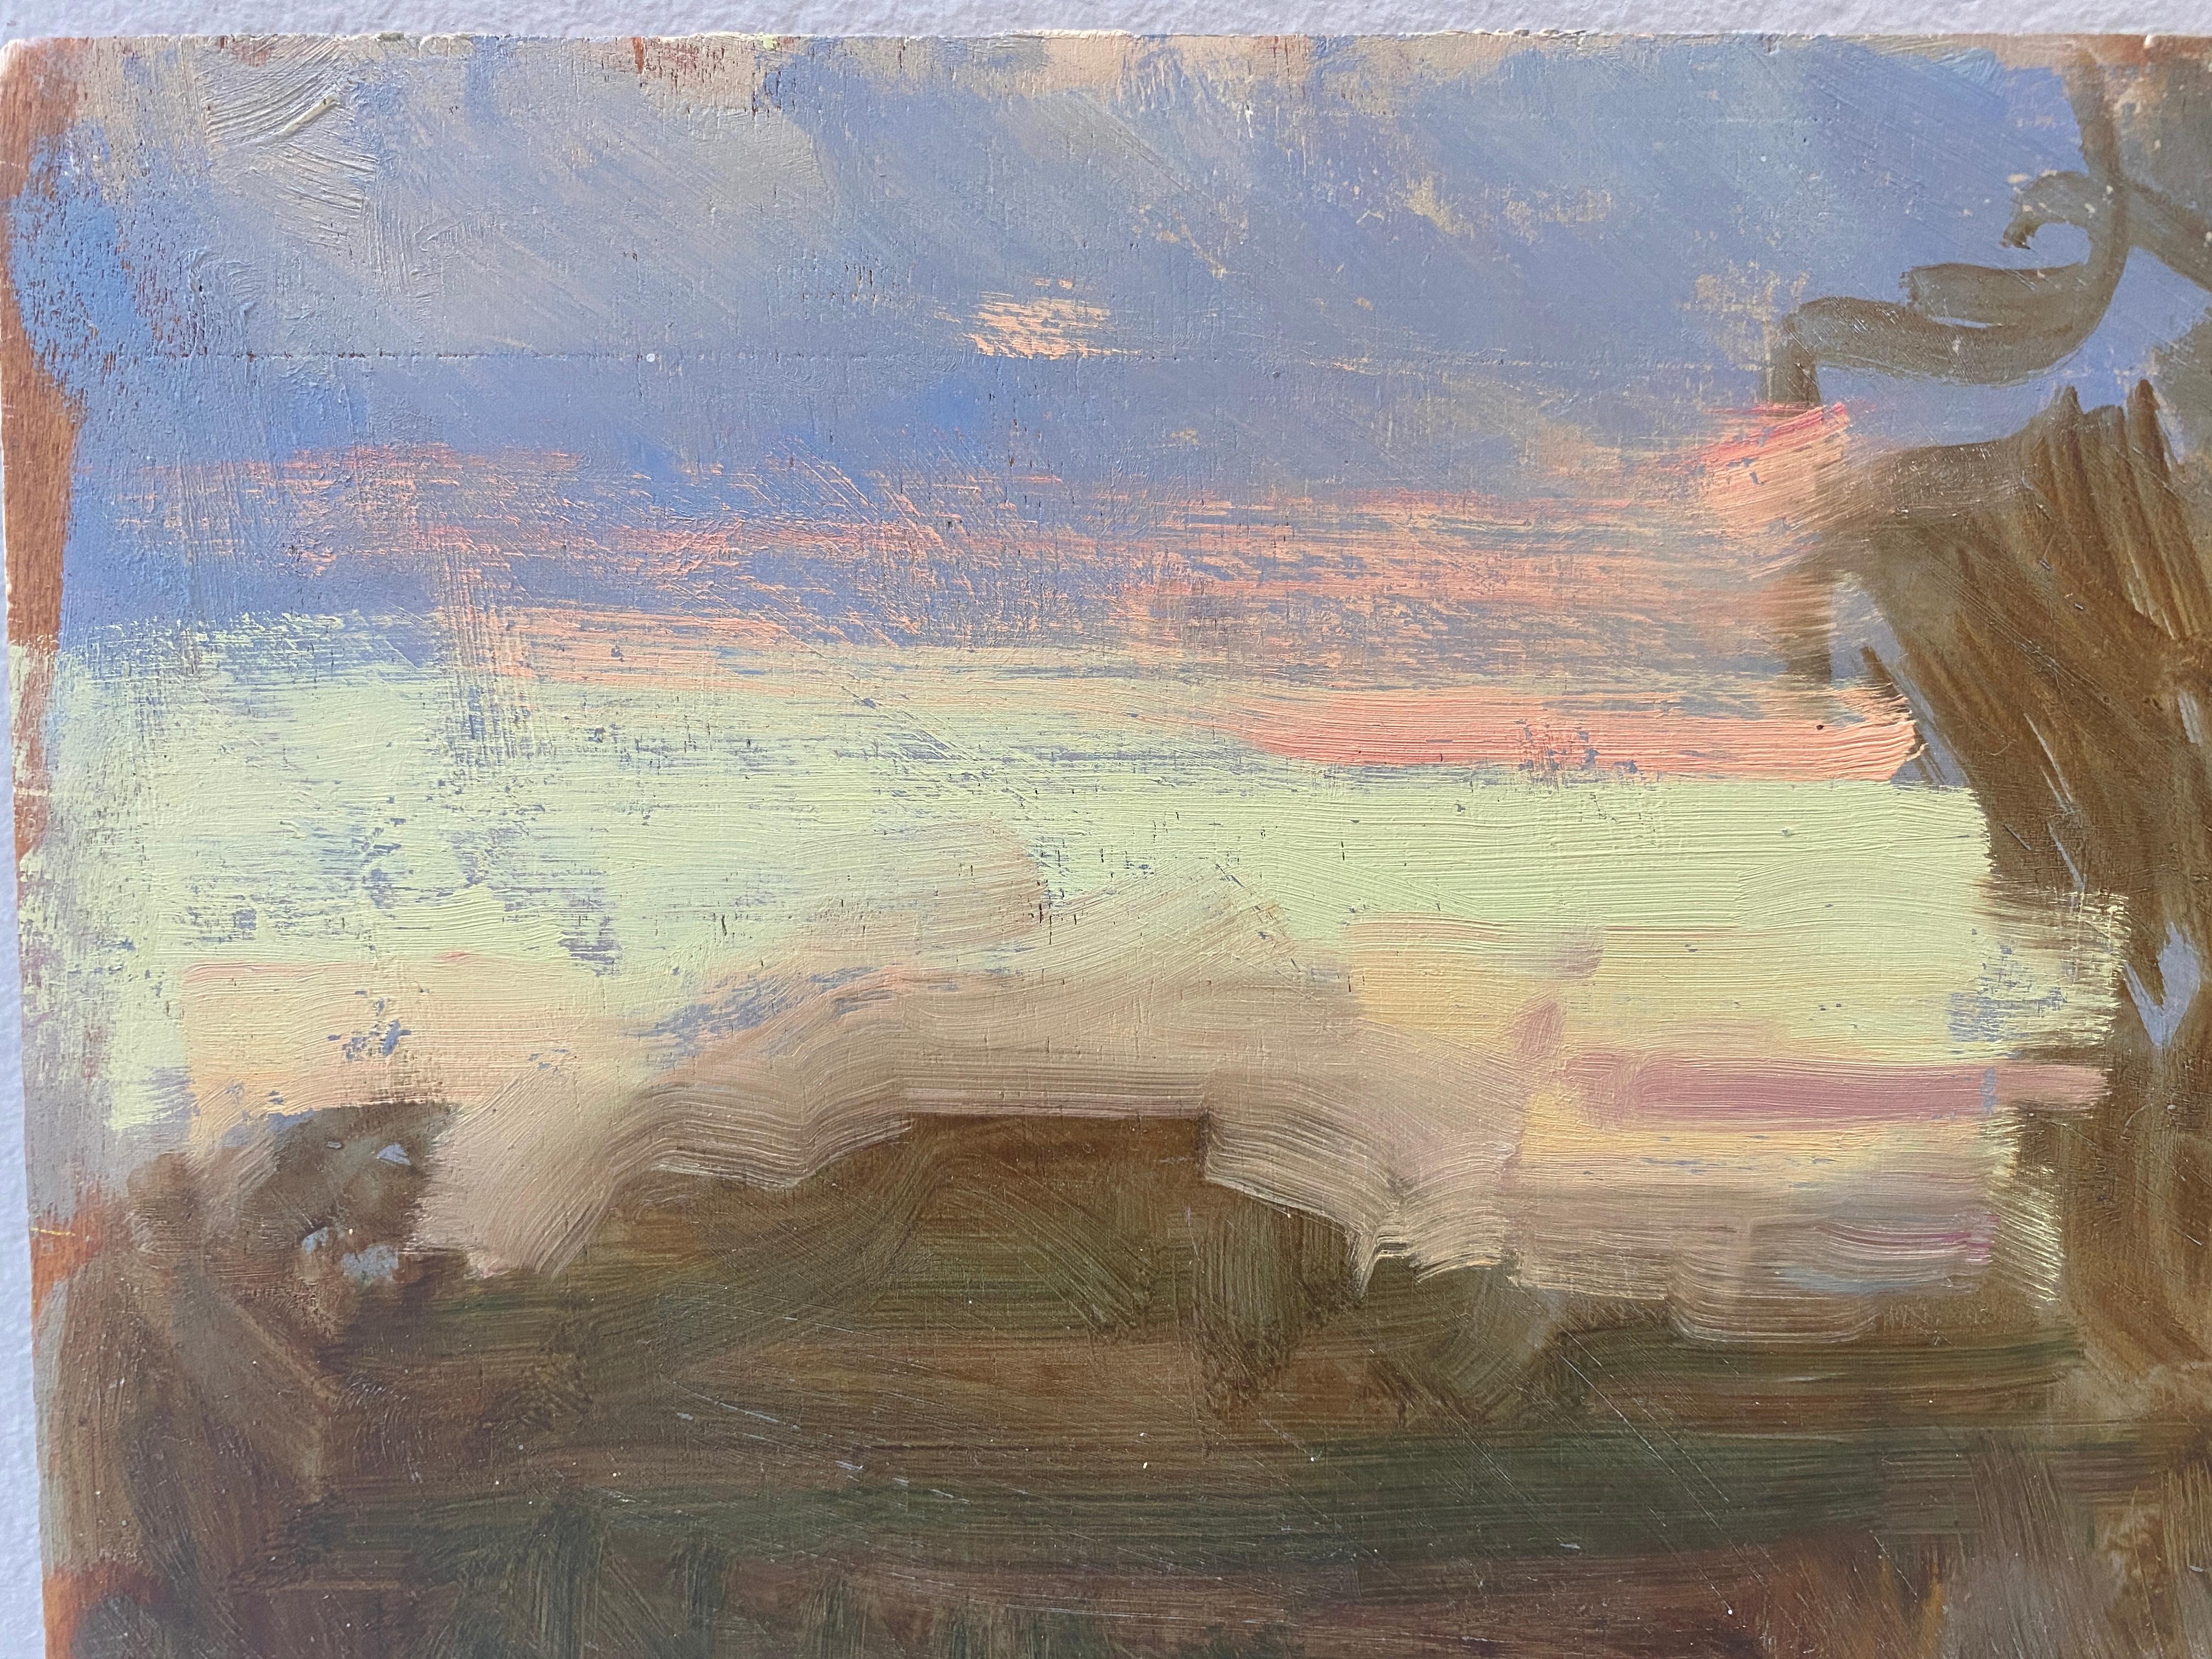 Painted en plein air in Tuscany, an early morning landscape painted at sunrise. The sky turns from a deep lilac on top, to a soft pink and bright pale yellow towards the horizon. A big blossoming tree stands firm in the foreground. Painted on wood